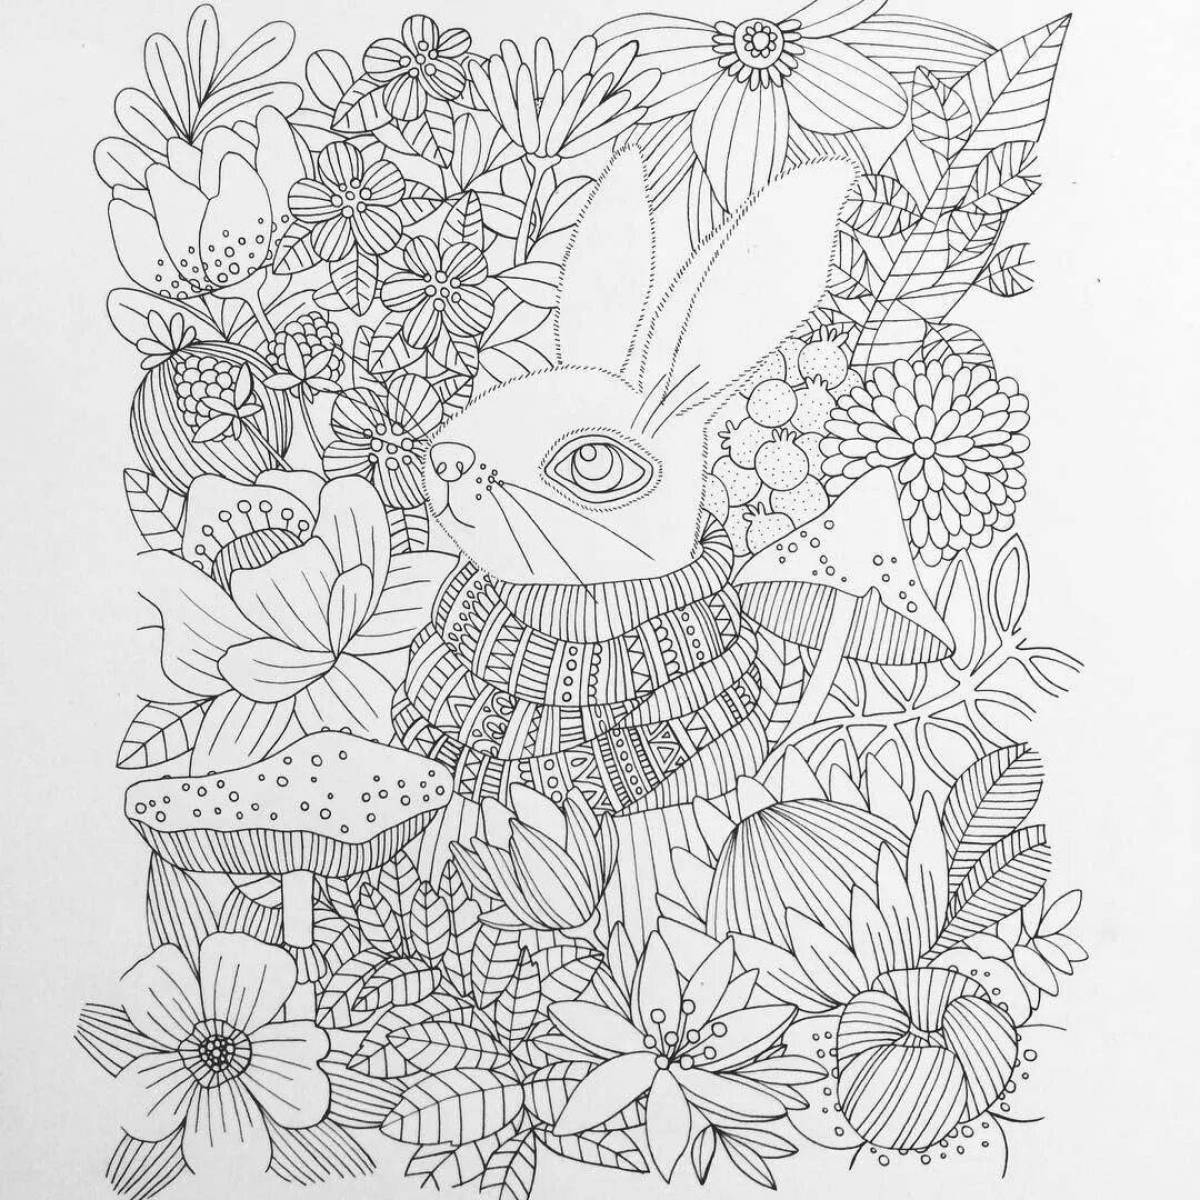 A fascinating anti-stress coloring hare